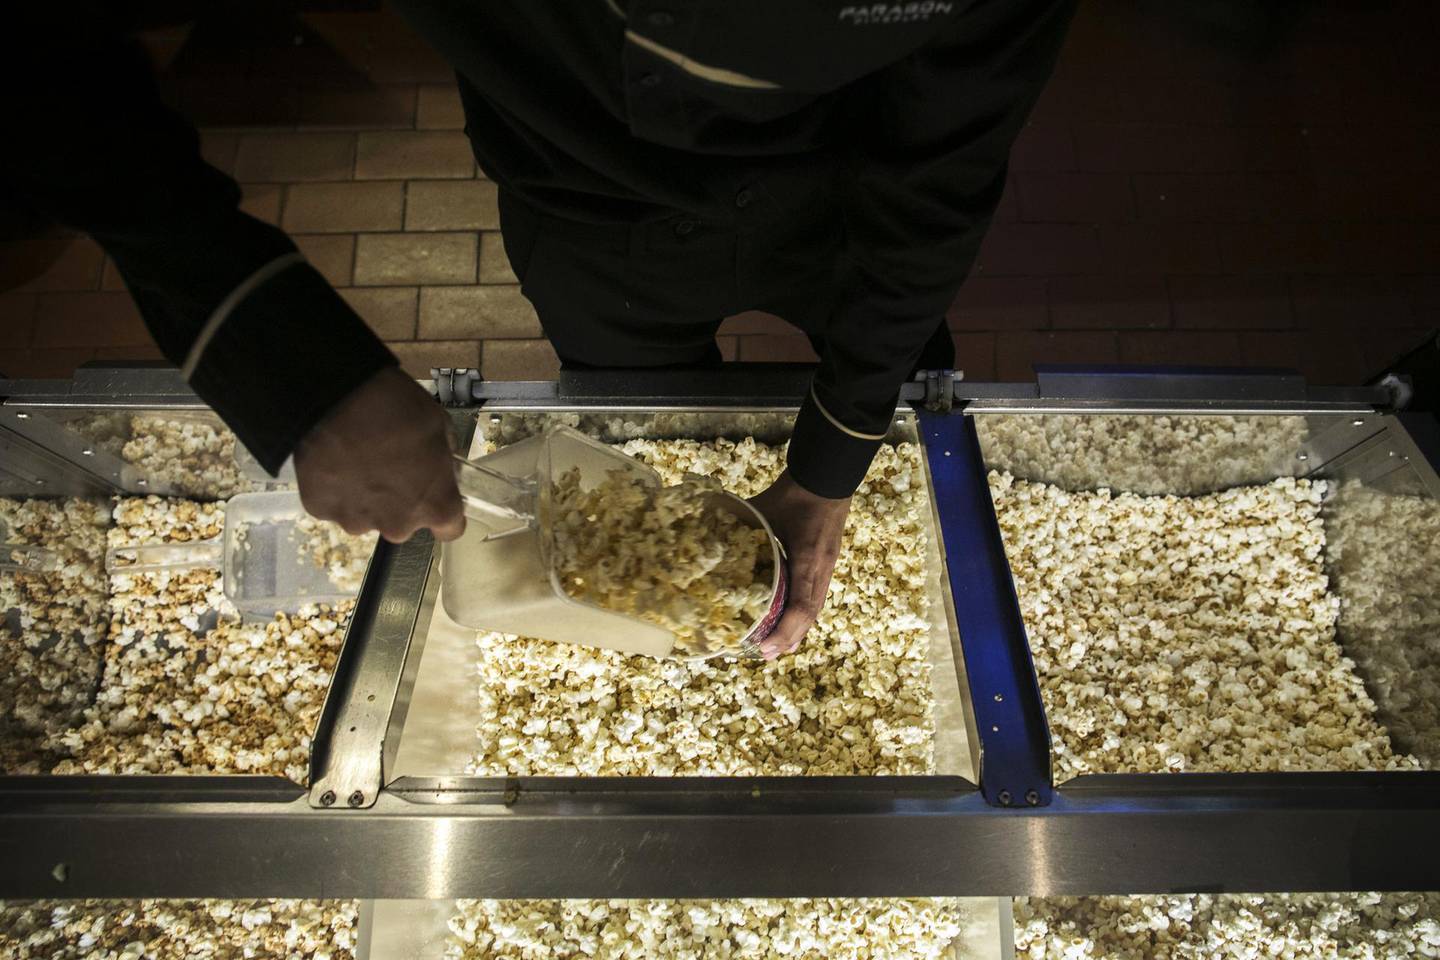 An employee scoops popcorn at a concessions stand at the Paragon Cineplex cinema, operated by Major Cineplex Group Pcl, in Bangkok, Thailand, on Saturday, May 11, 2019. Walt Disney Co.'s blockbuster "Avengers: Endgame" has turned Thailand's Major Cineplex Group into one of Asia's best-performing cinema stocks this year. Photographer: Brent Lewin/Bloomberg